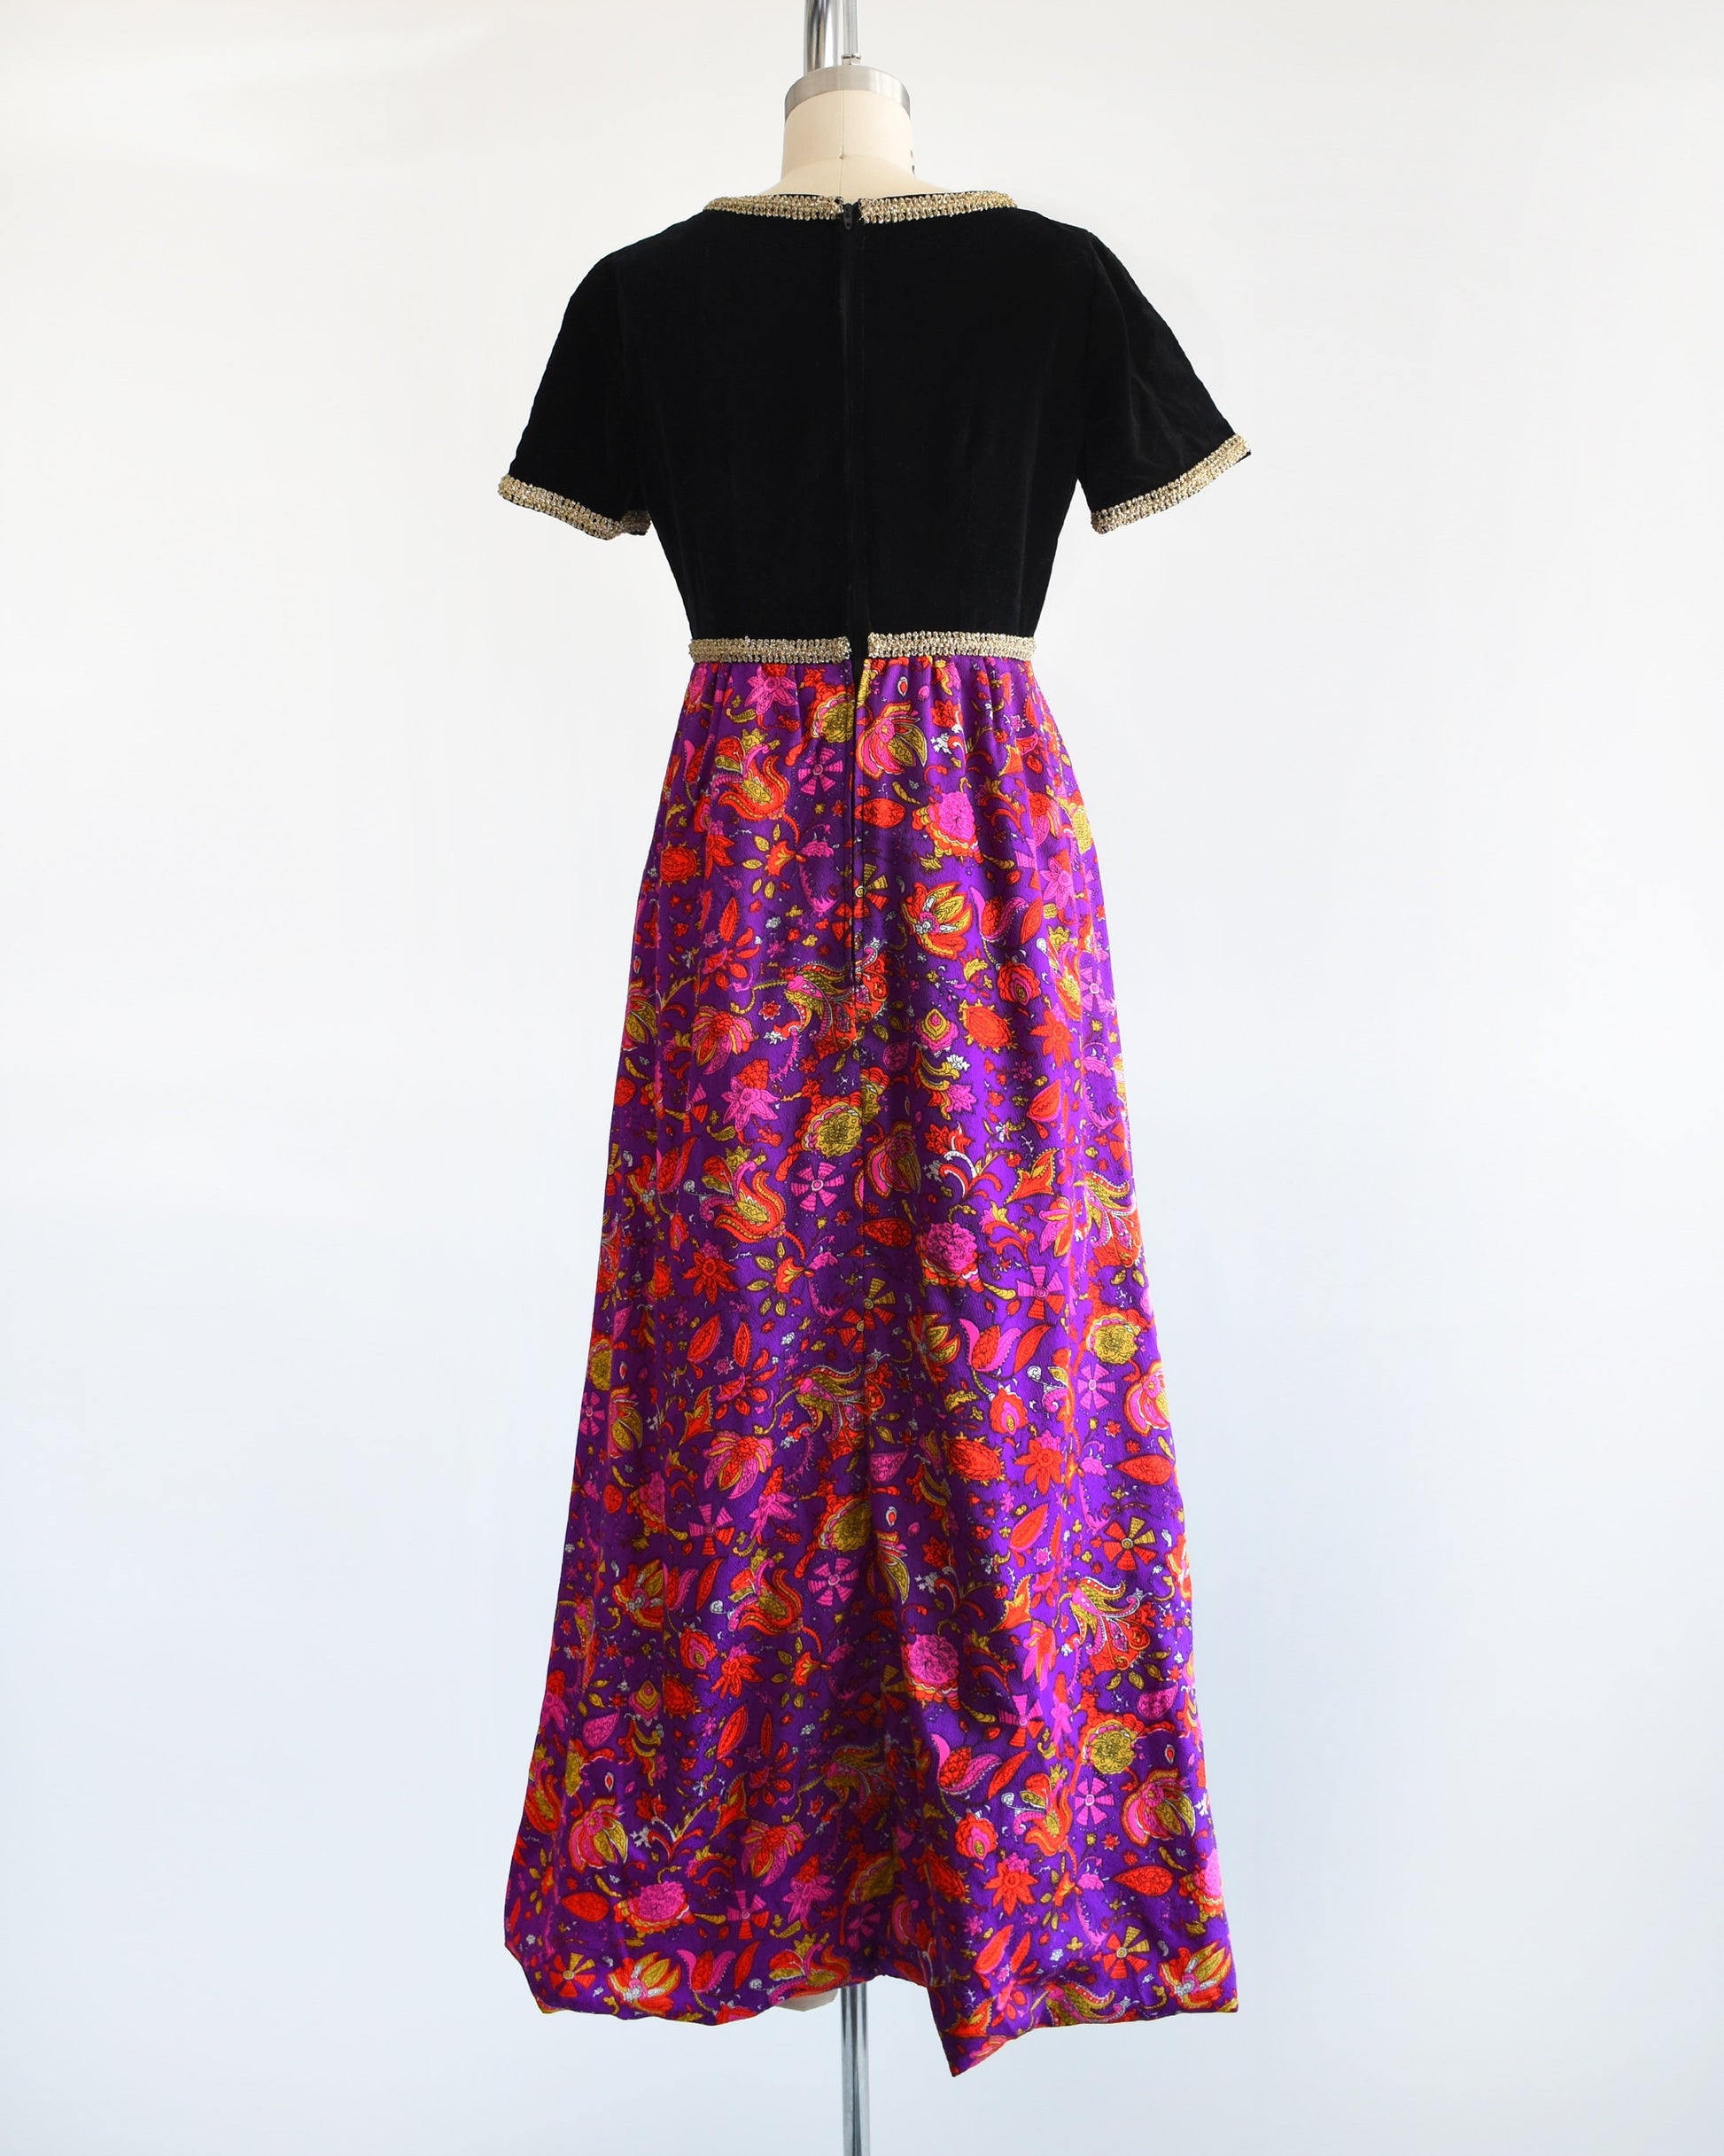 Back view of a vintage 60s/70s maxi dress that has a black velvet bodice with gold metallic ribbon trim, along with a purple skirt with pink, orange, yellow, and white floral print.